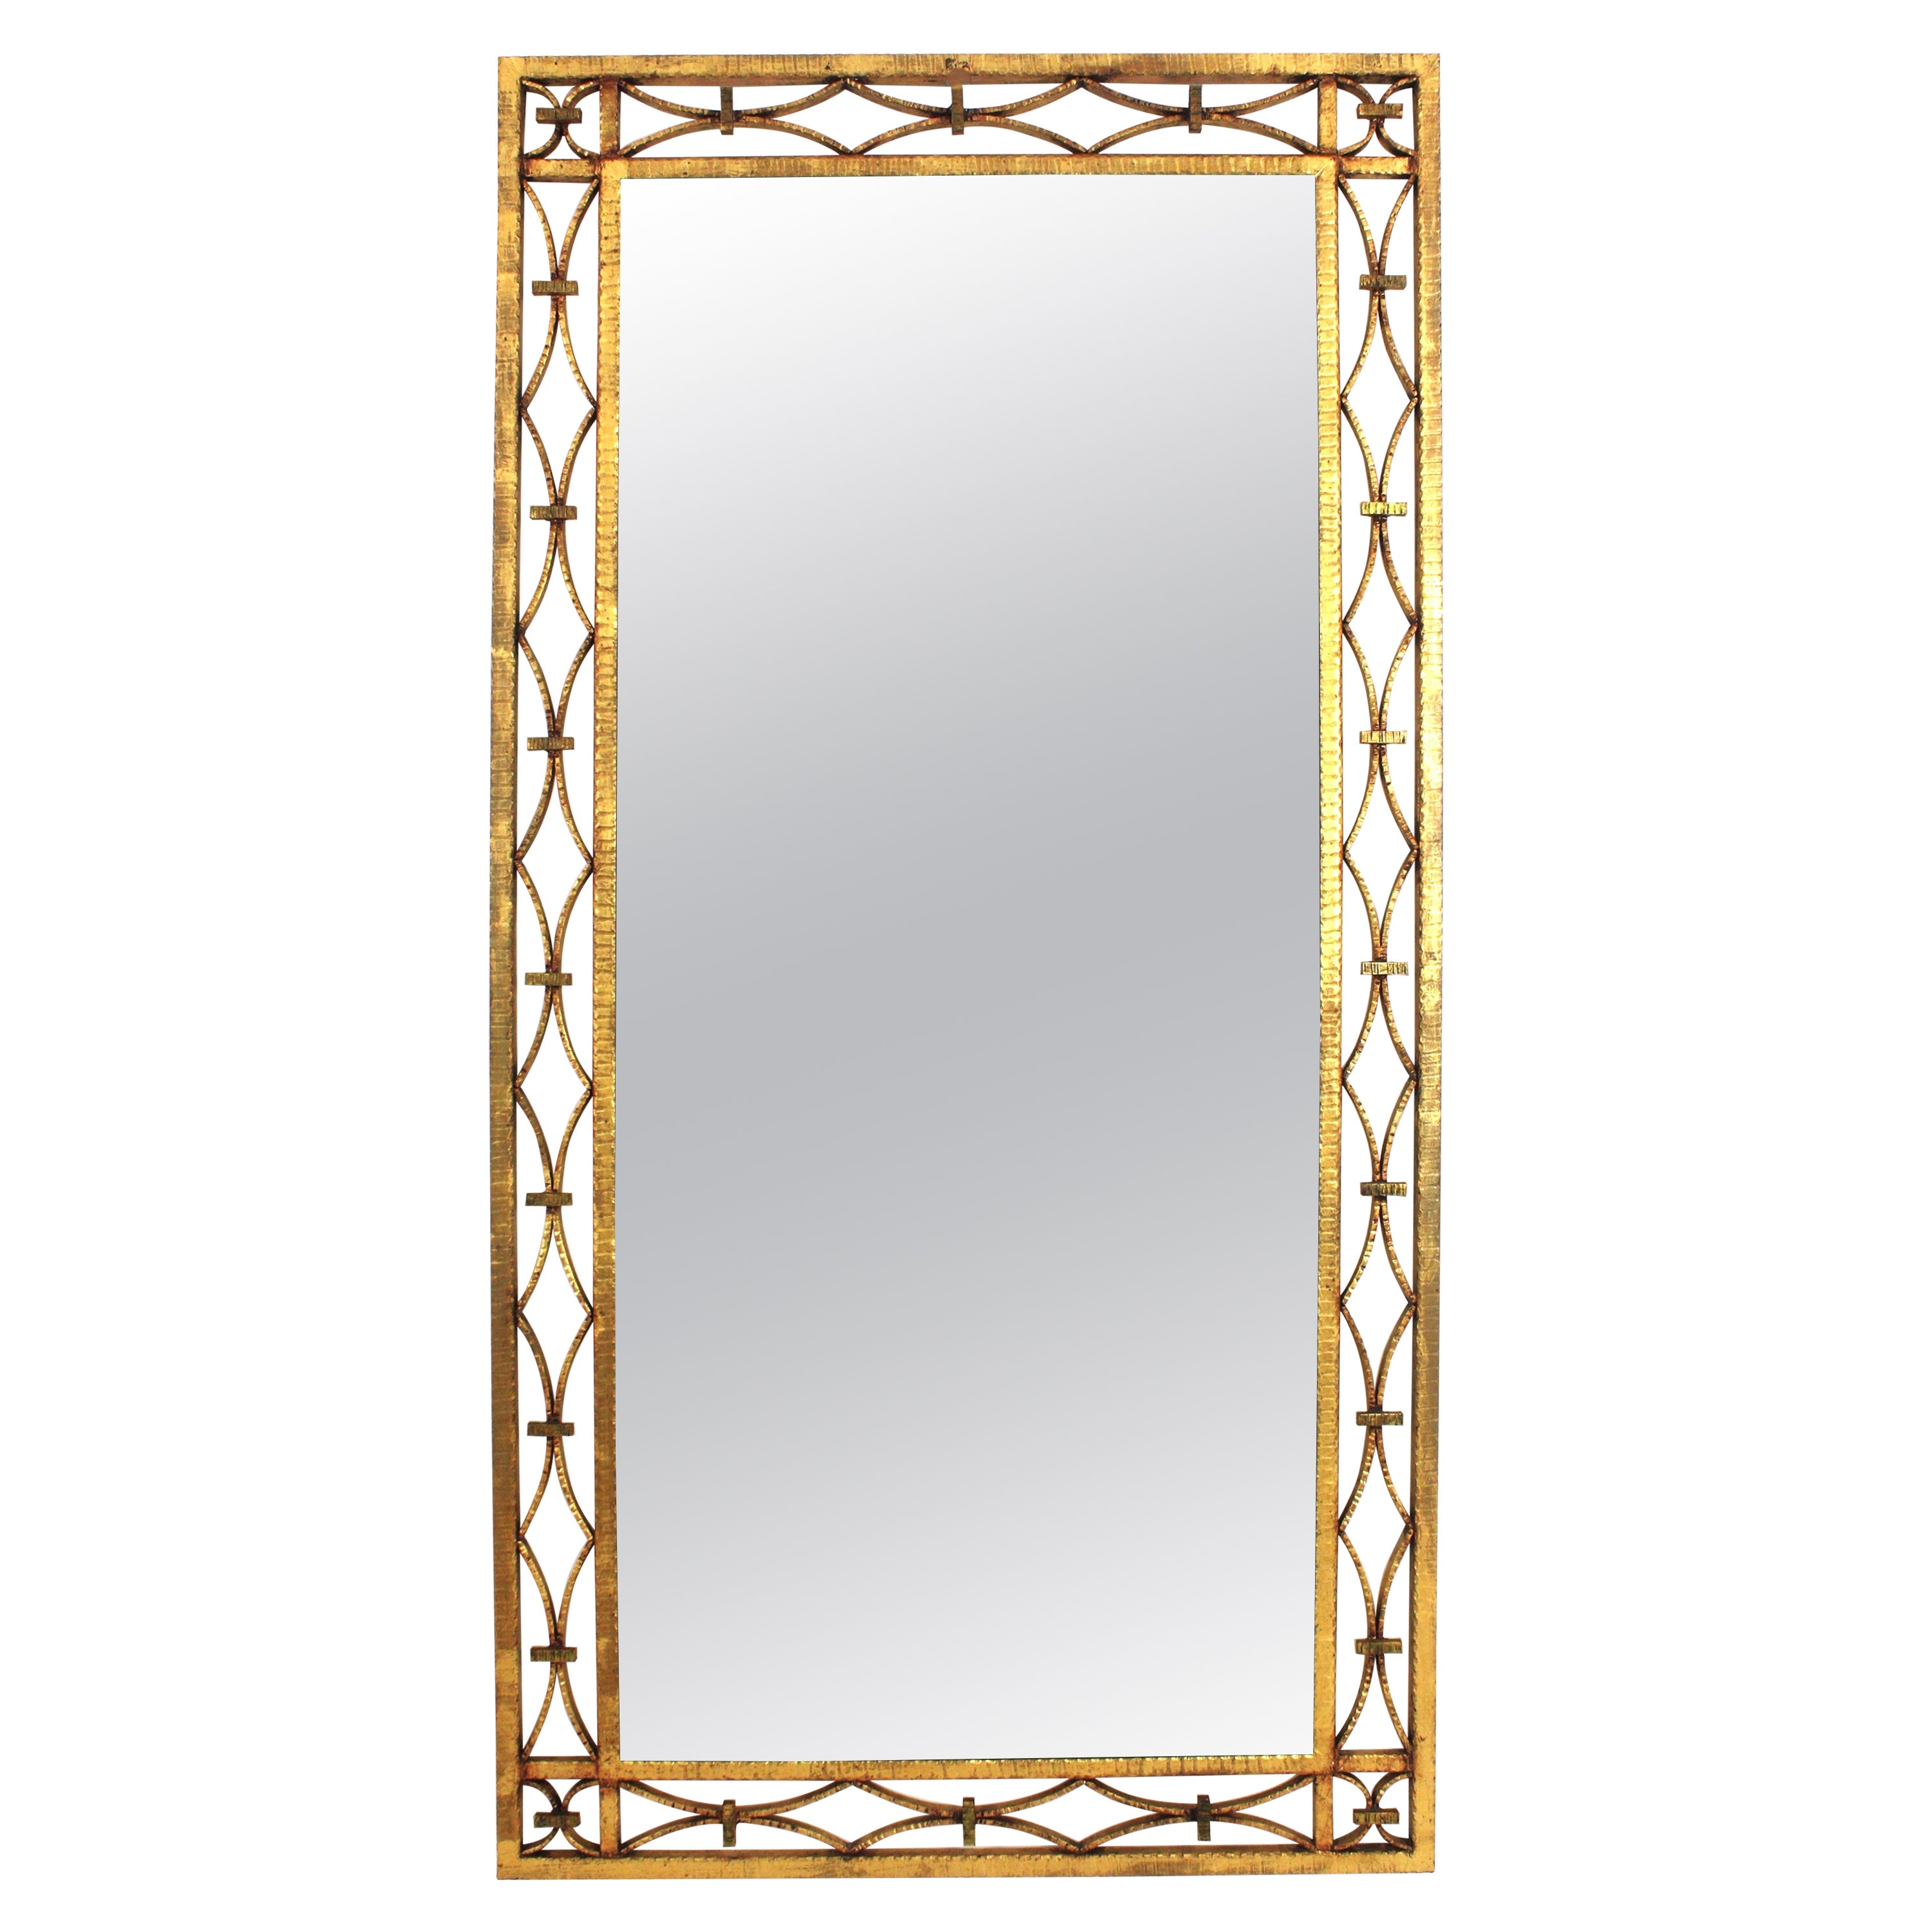 French Art Deco Rectangular Mirror in Gilded Wrought Iron  For Sale